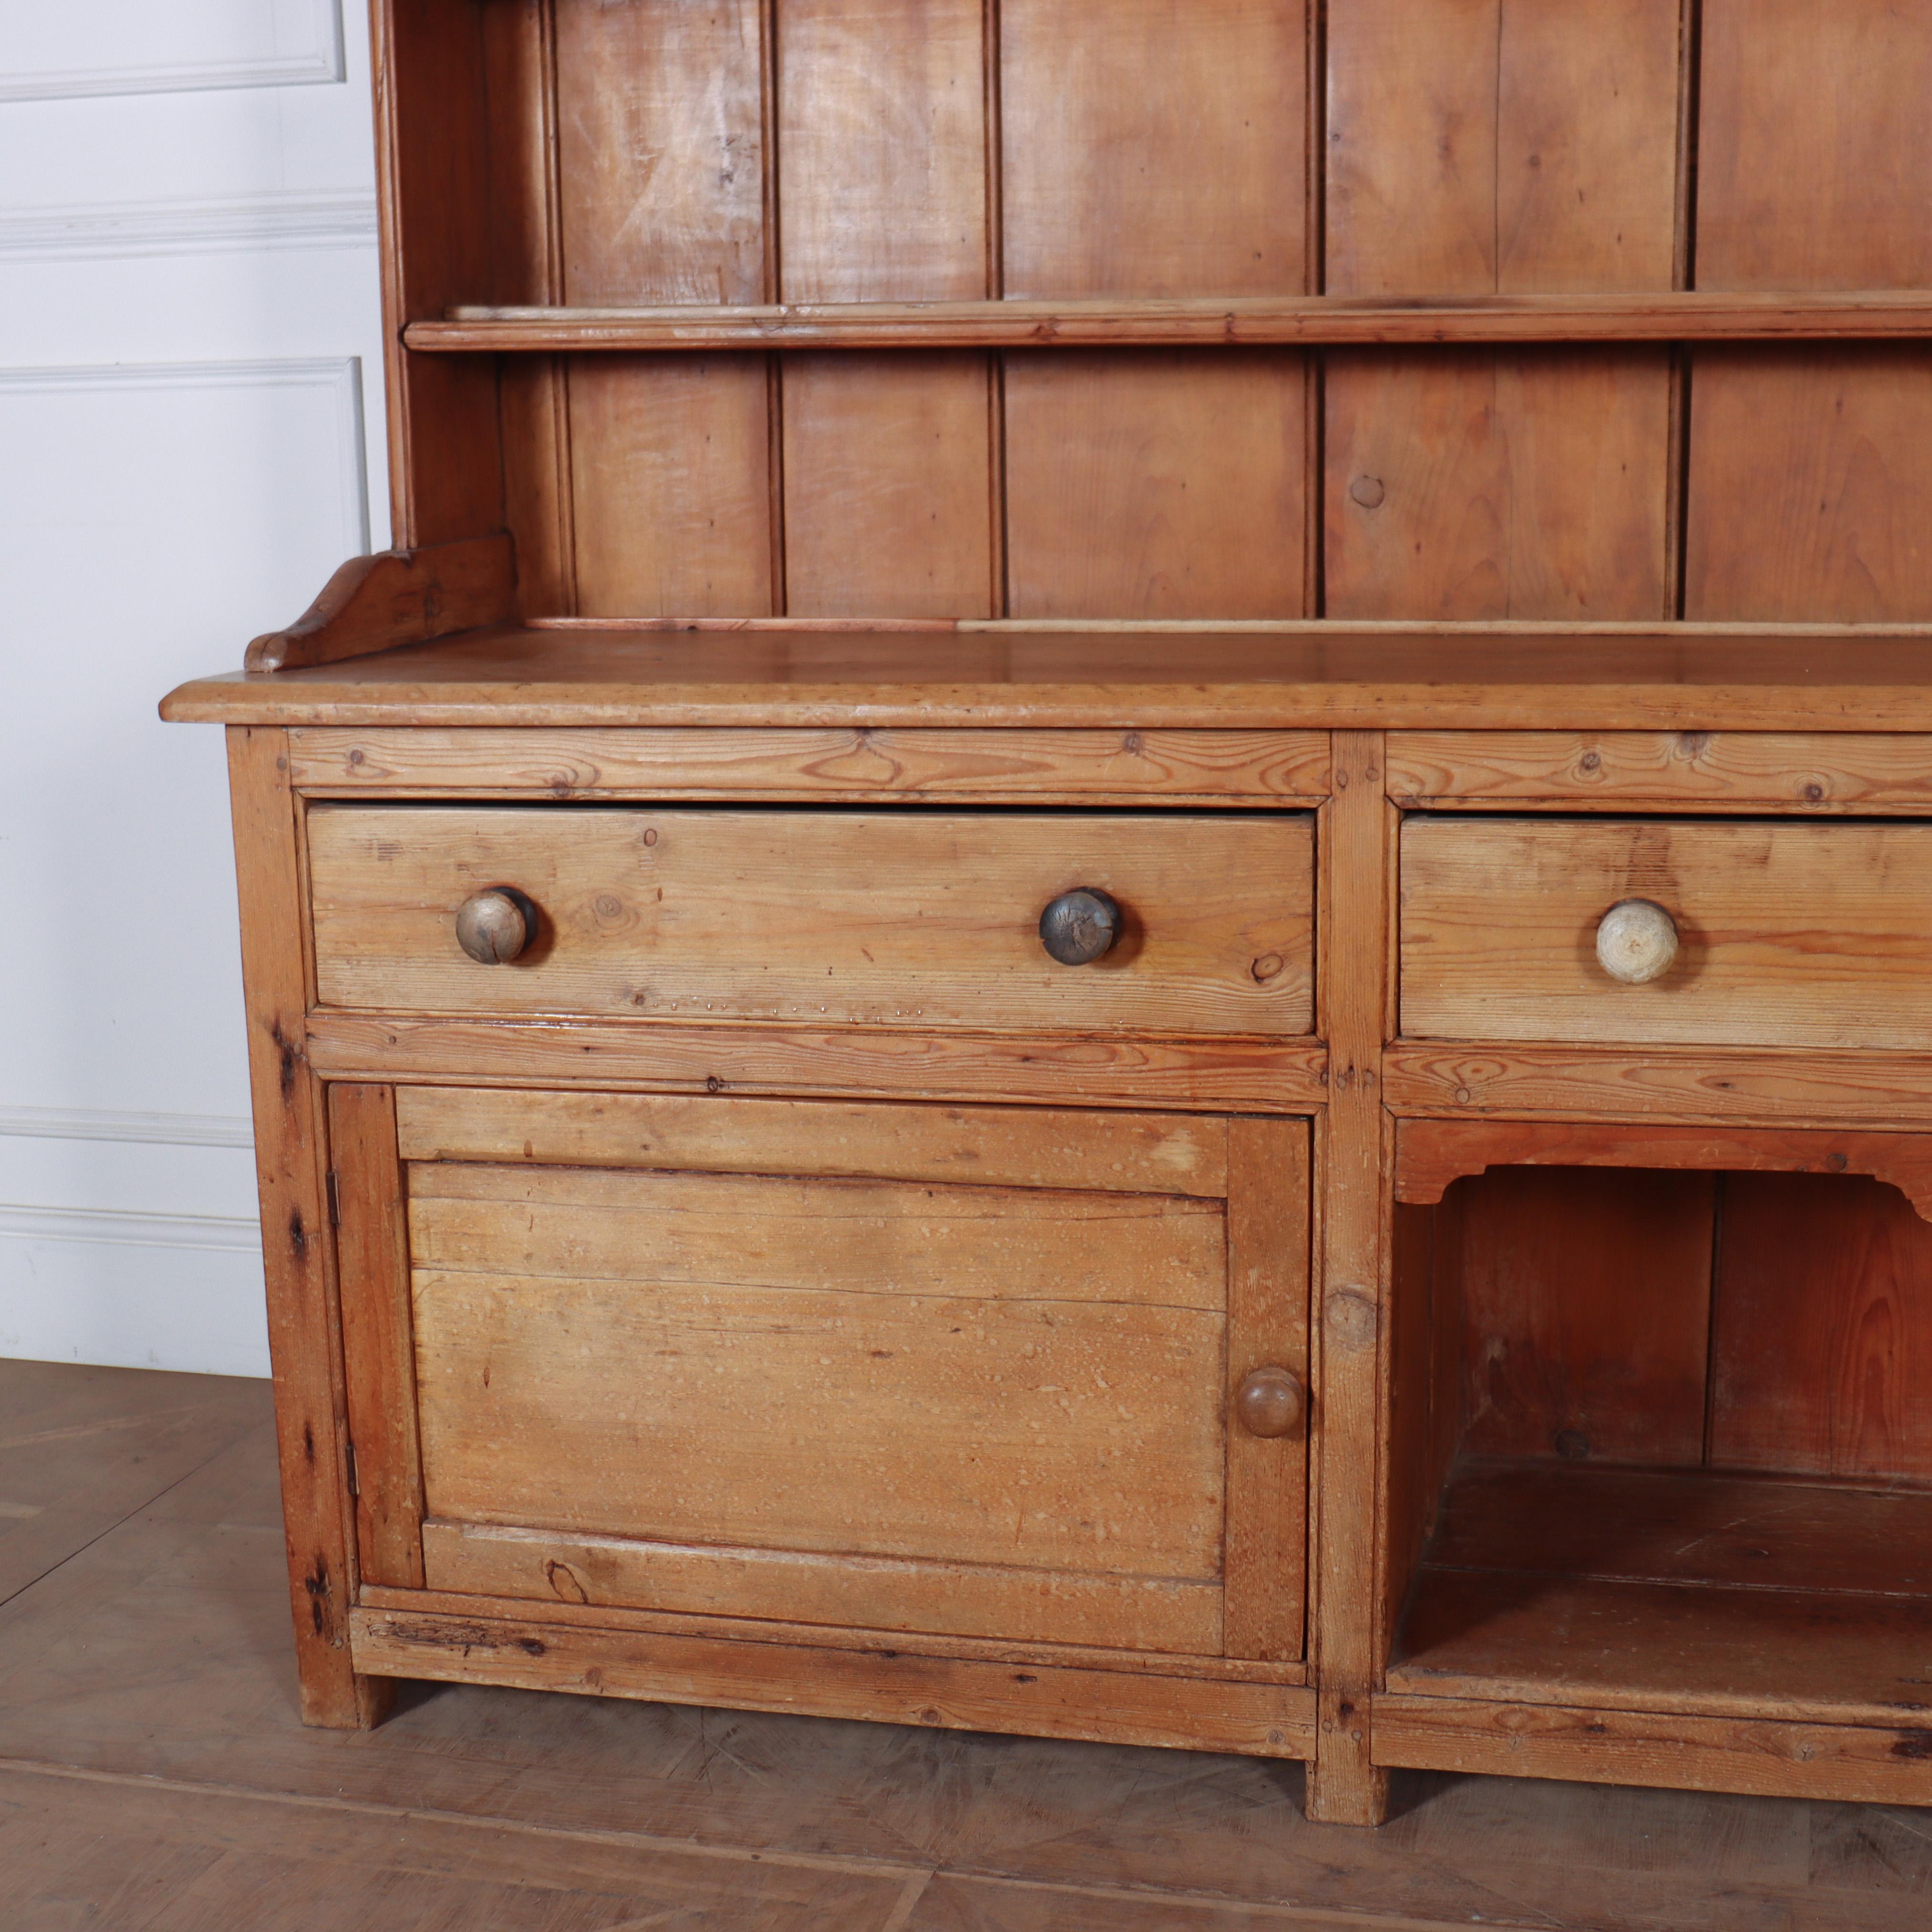 Wonderful early 19th C Welsh pine country house dresser with a dog kennel. Great colour and originality. 1830.

Reference: 7940

Dimensions
103.5 inches (263 cms) Wide
20.5 inches (52 cms) Deep
88 inches (224 cms) High